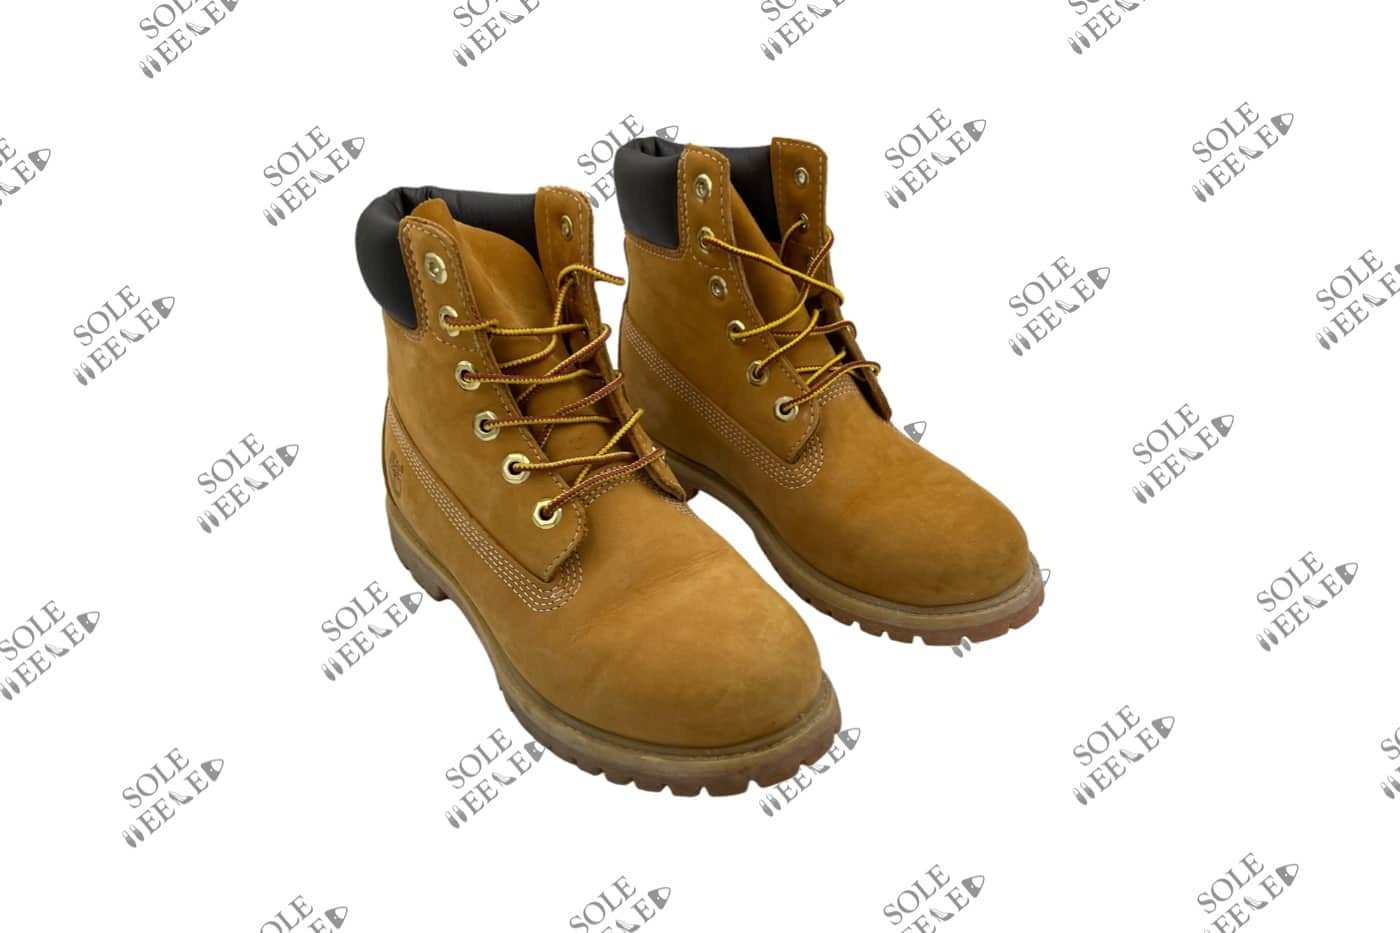 How to Clean Alcohol Off Timberland Boots?